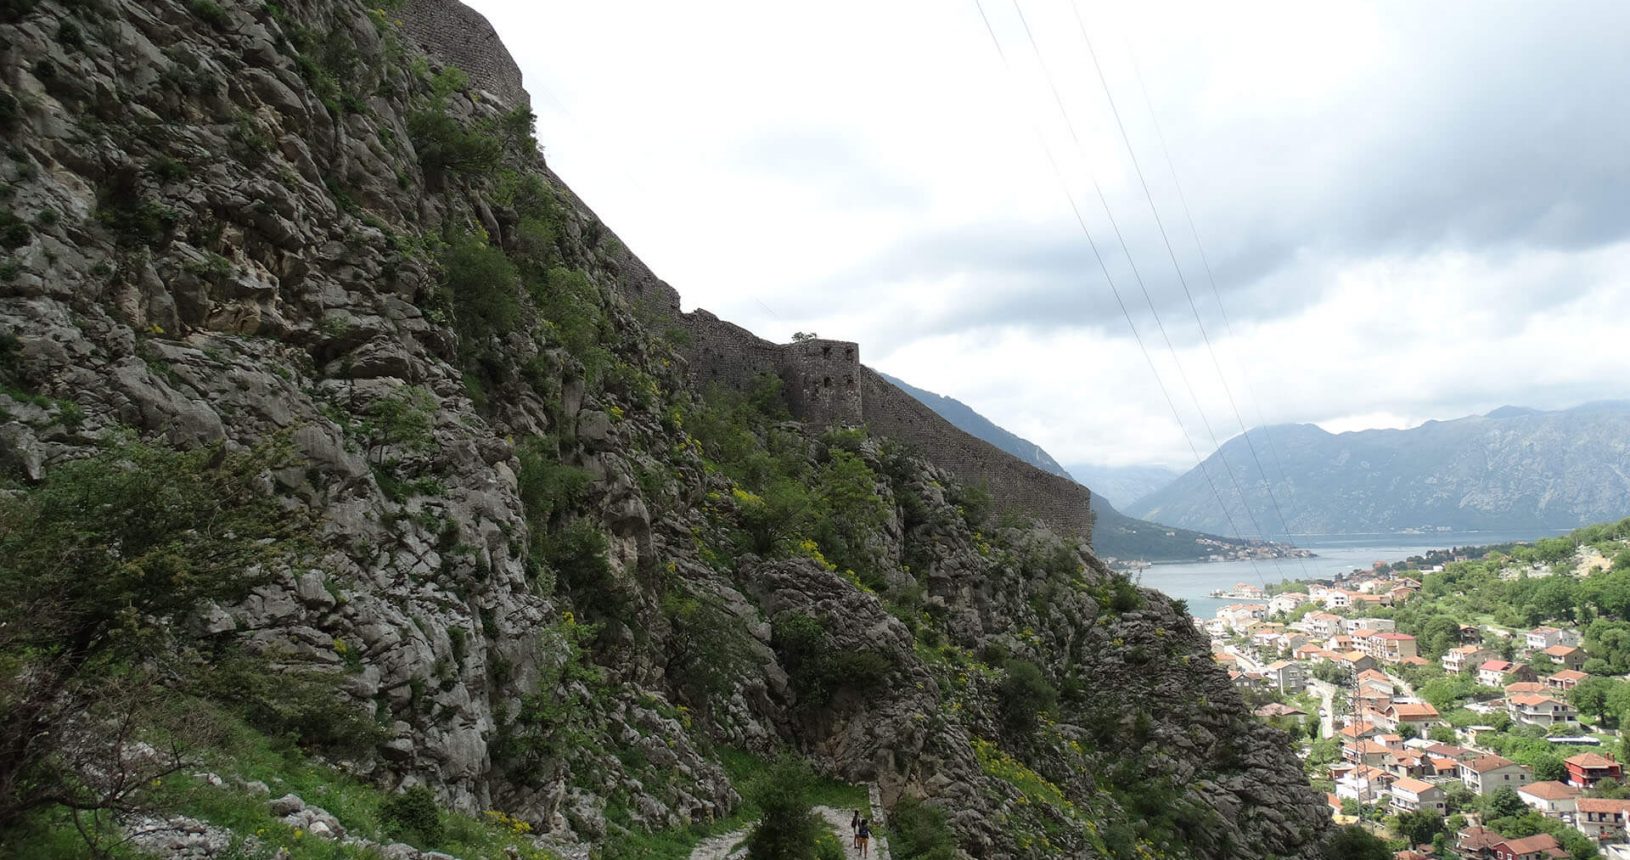 Free trail to Kotor Fortress